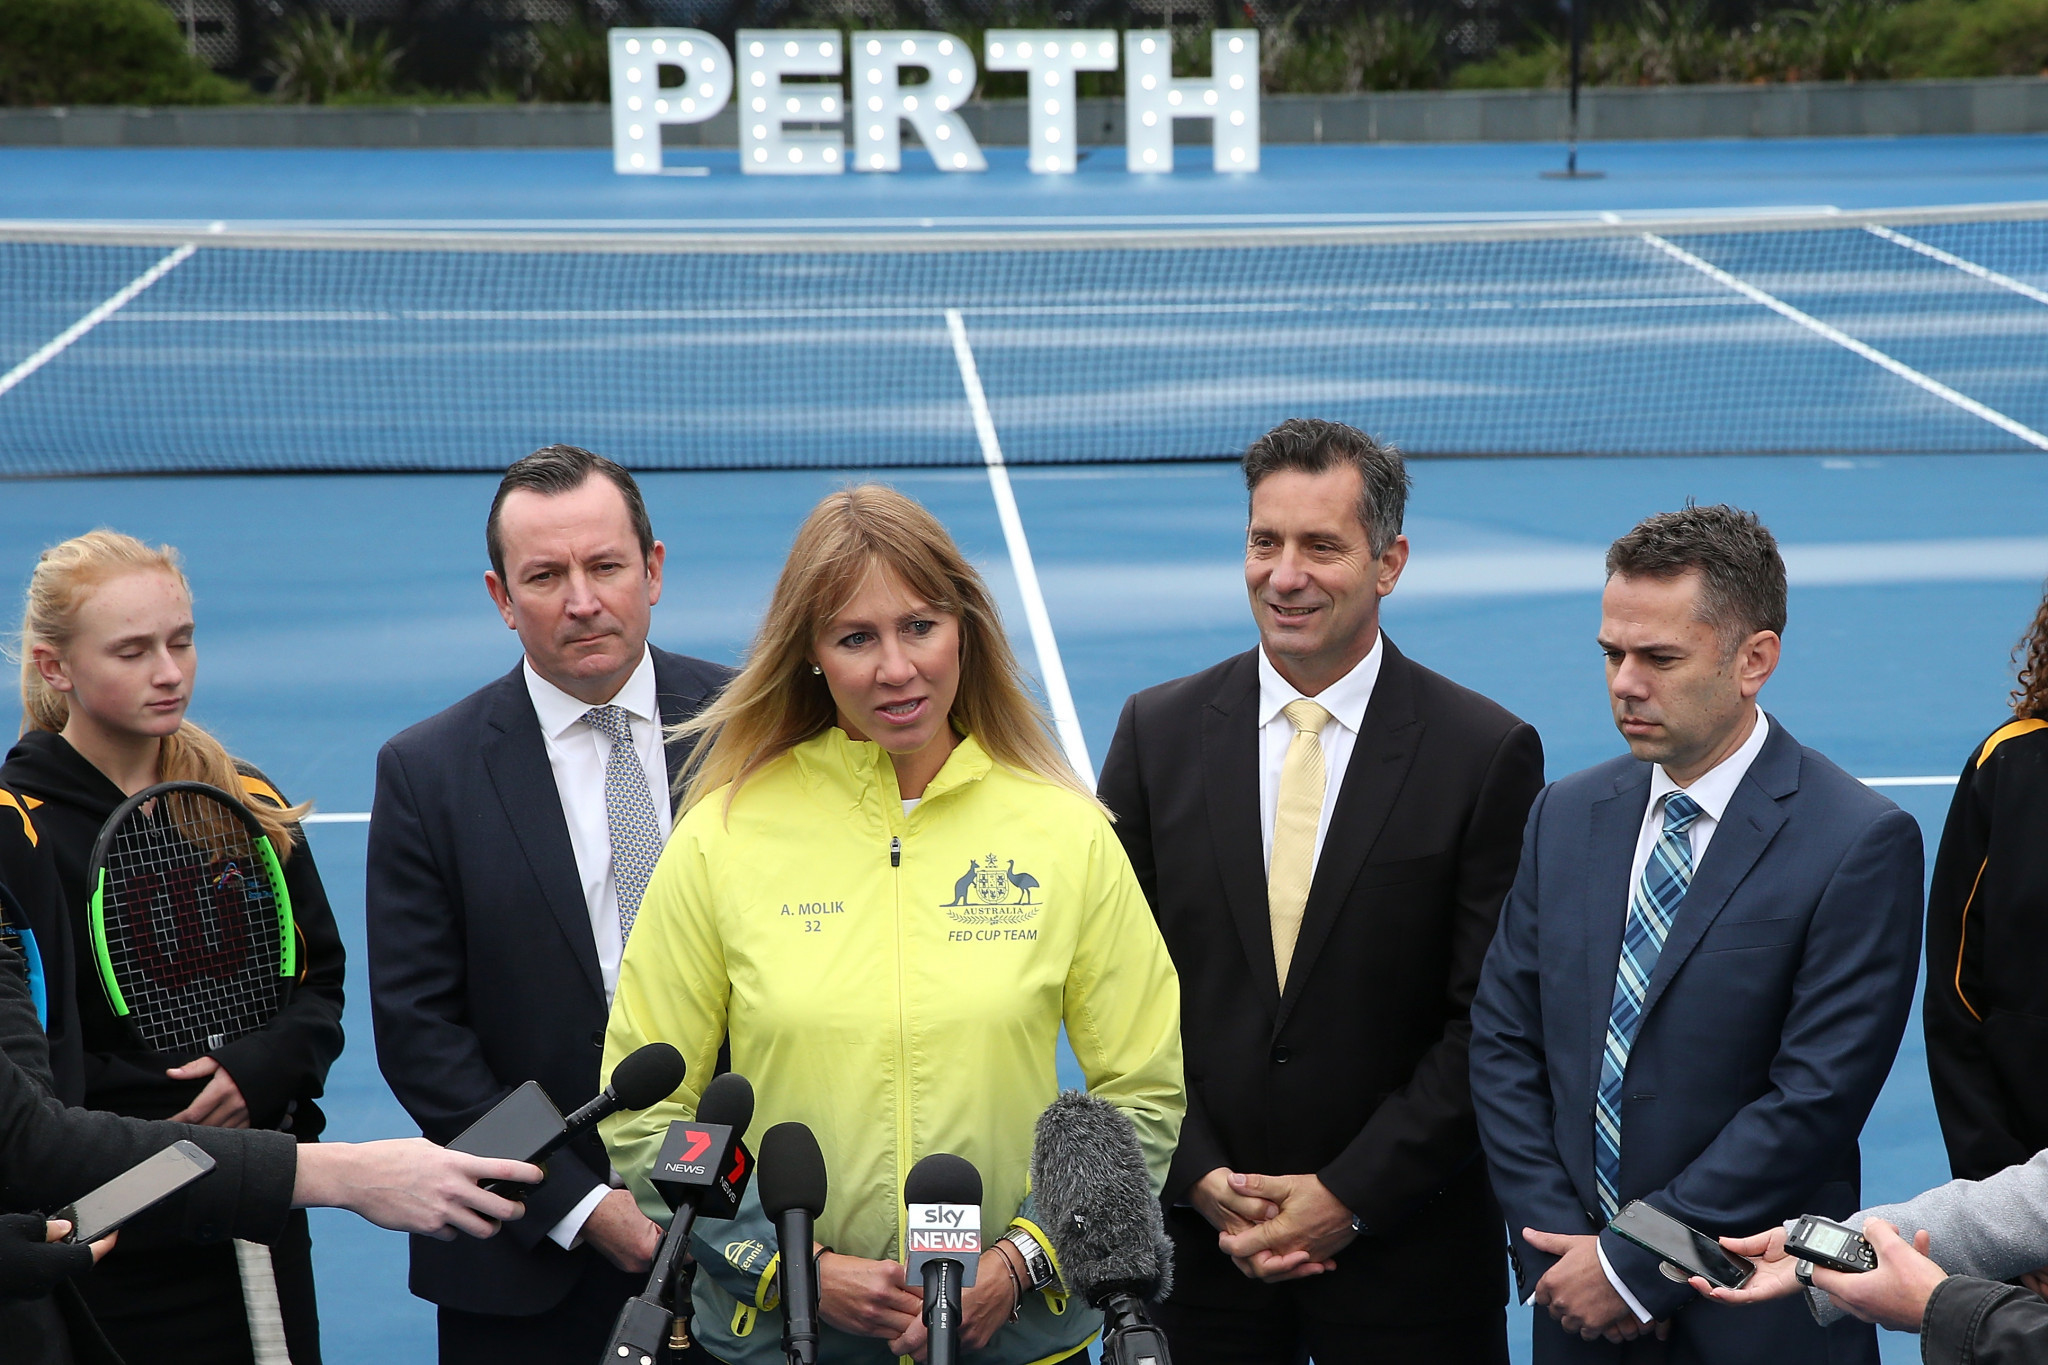 Perth named as host of Fed Cup final